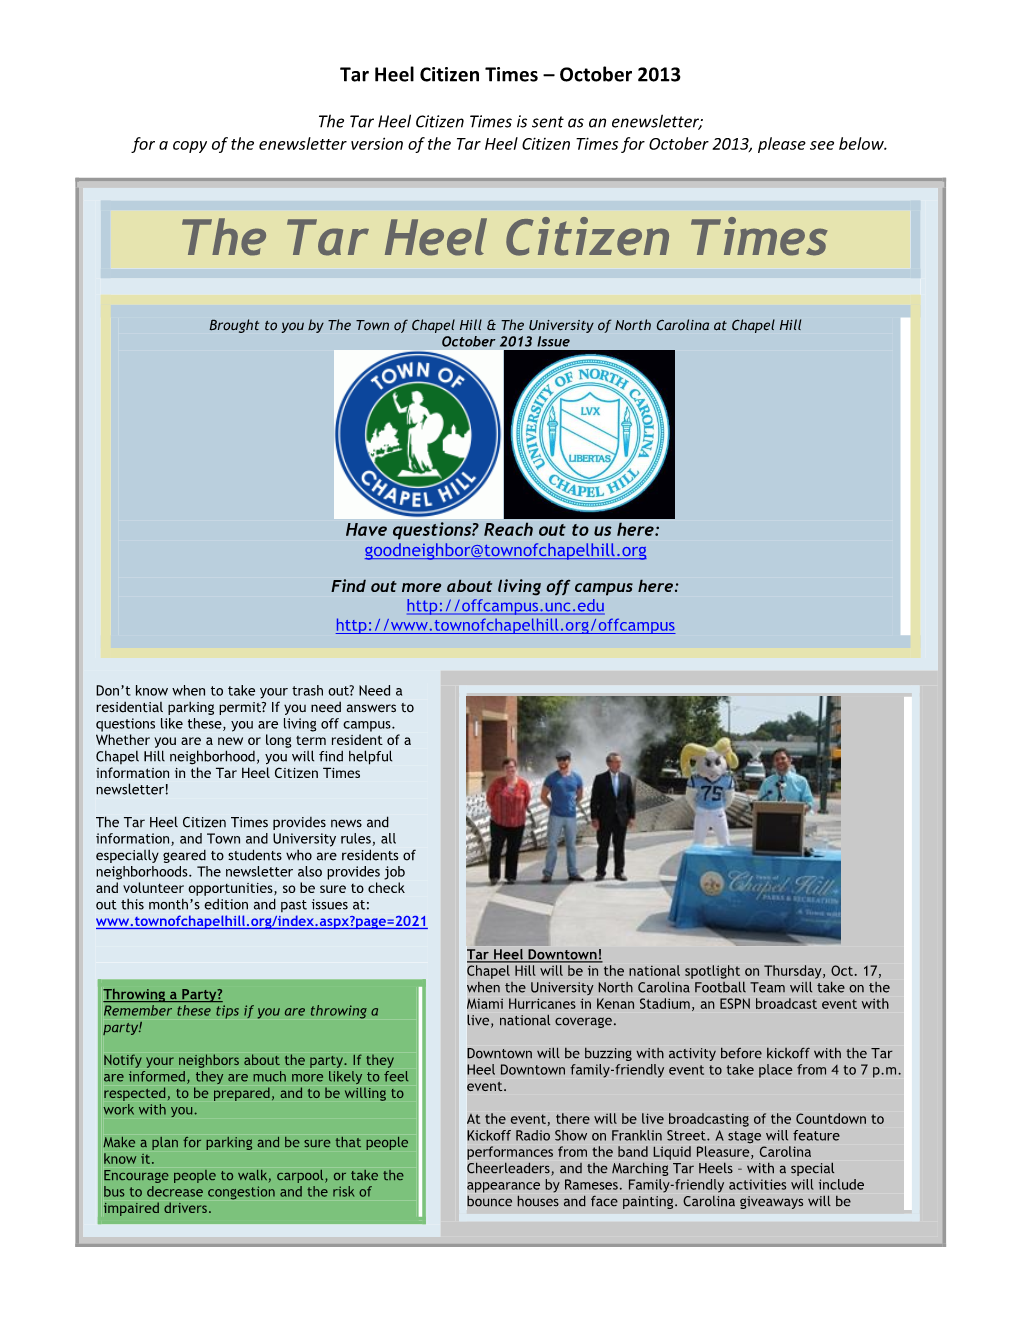 The Tar Heel Citizen Times Is Sent As an Enewsletter; for a Copy of the Enewsletter Version of the Tar Heel Citizen Times for October 2013, Please See Below